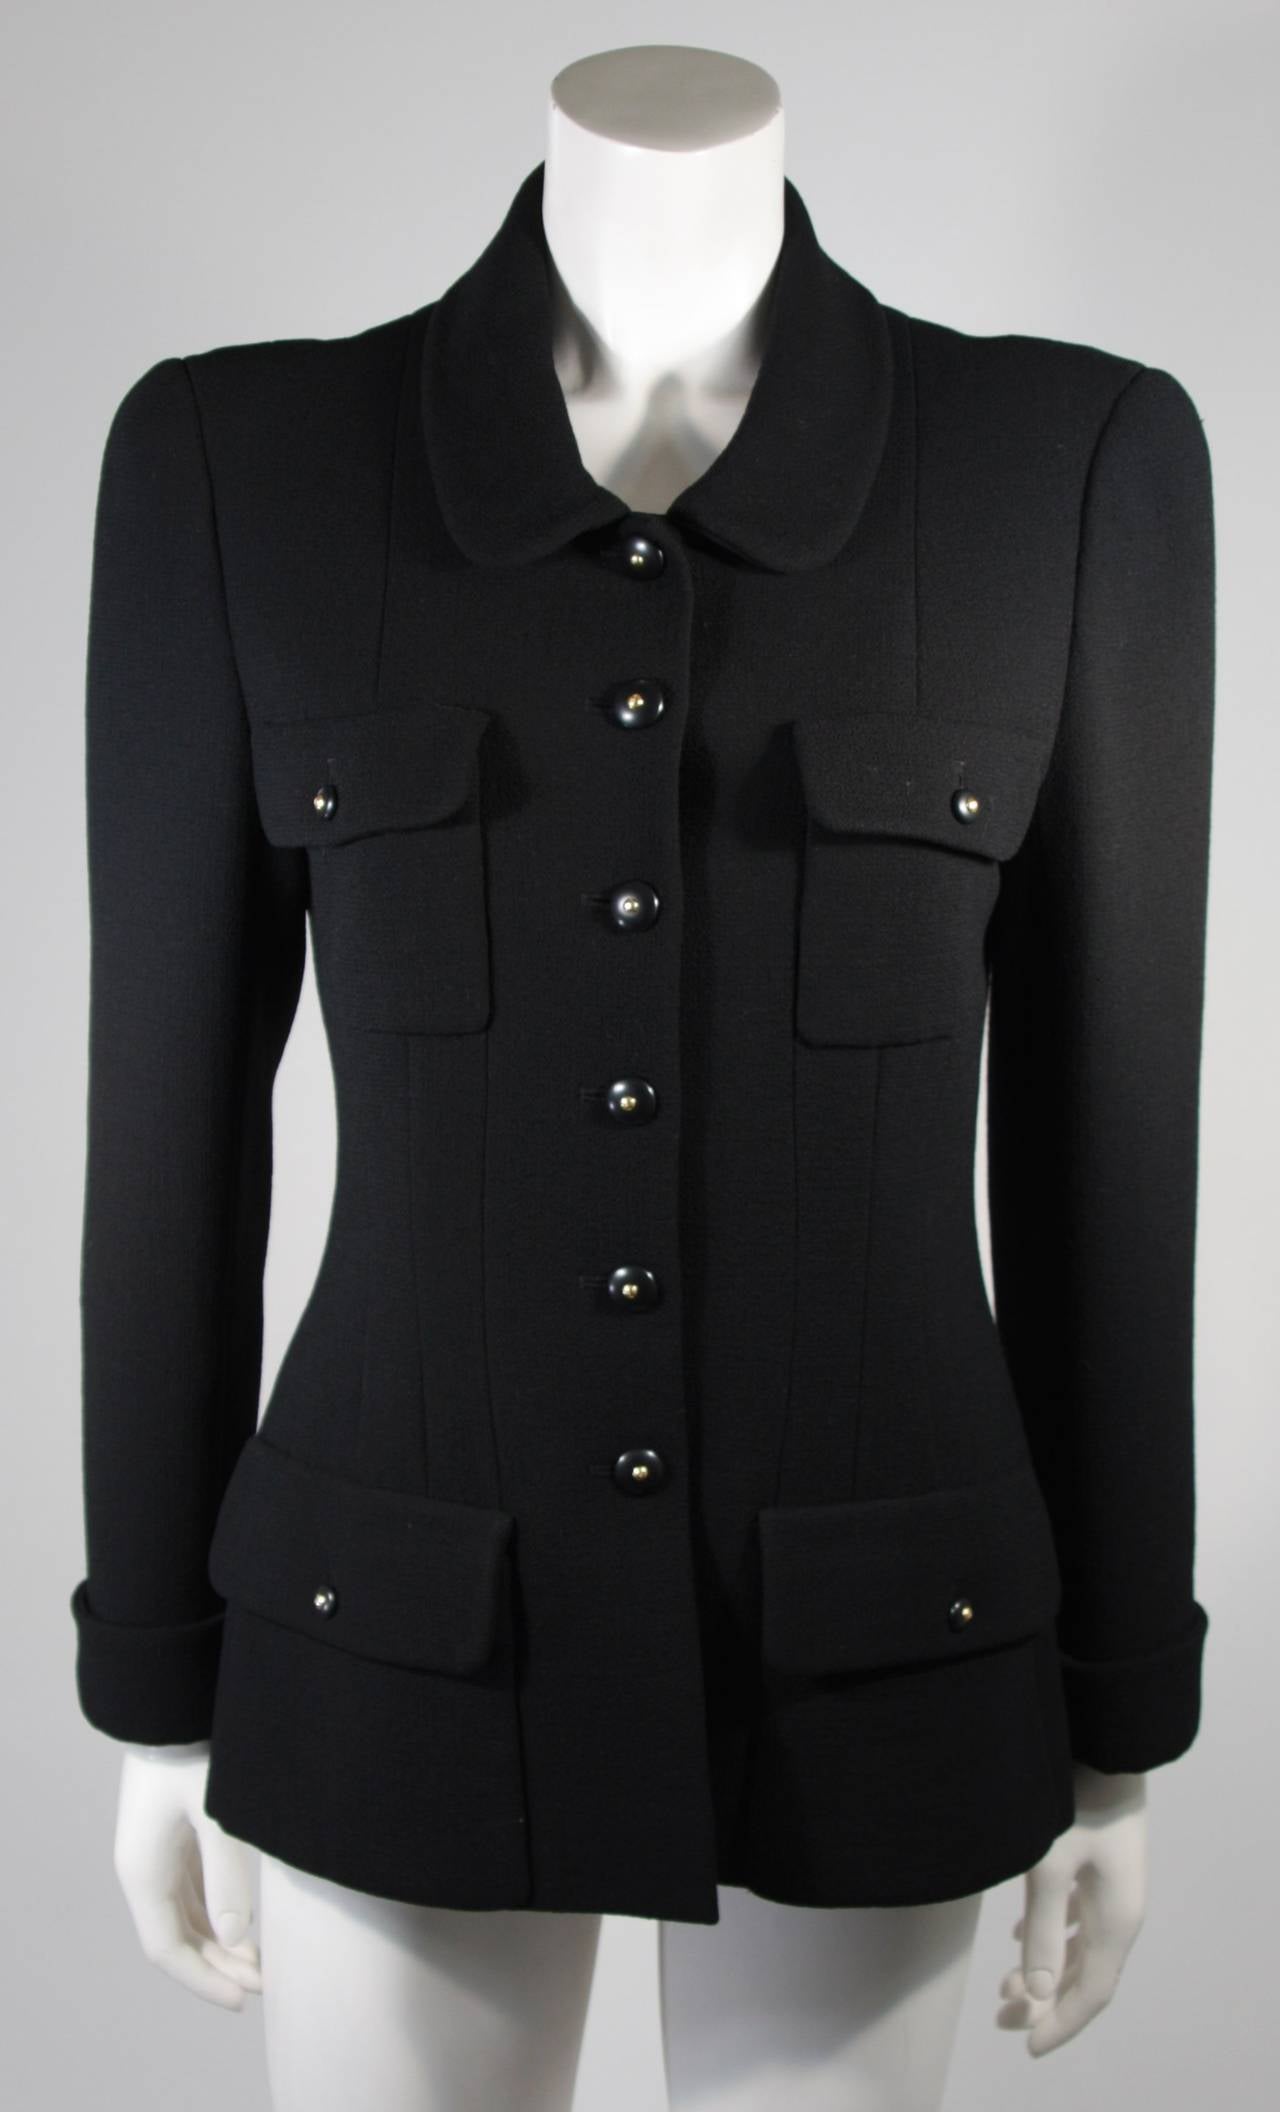 Chanel Black Wool Skirt Suit Size Military Inspired with Peter Pan Collar sz 8 4